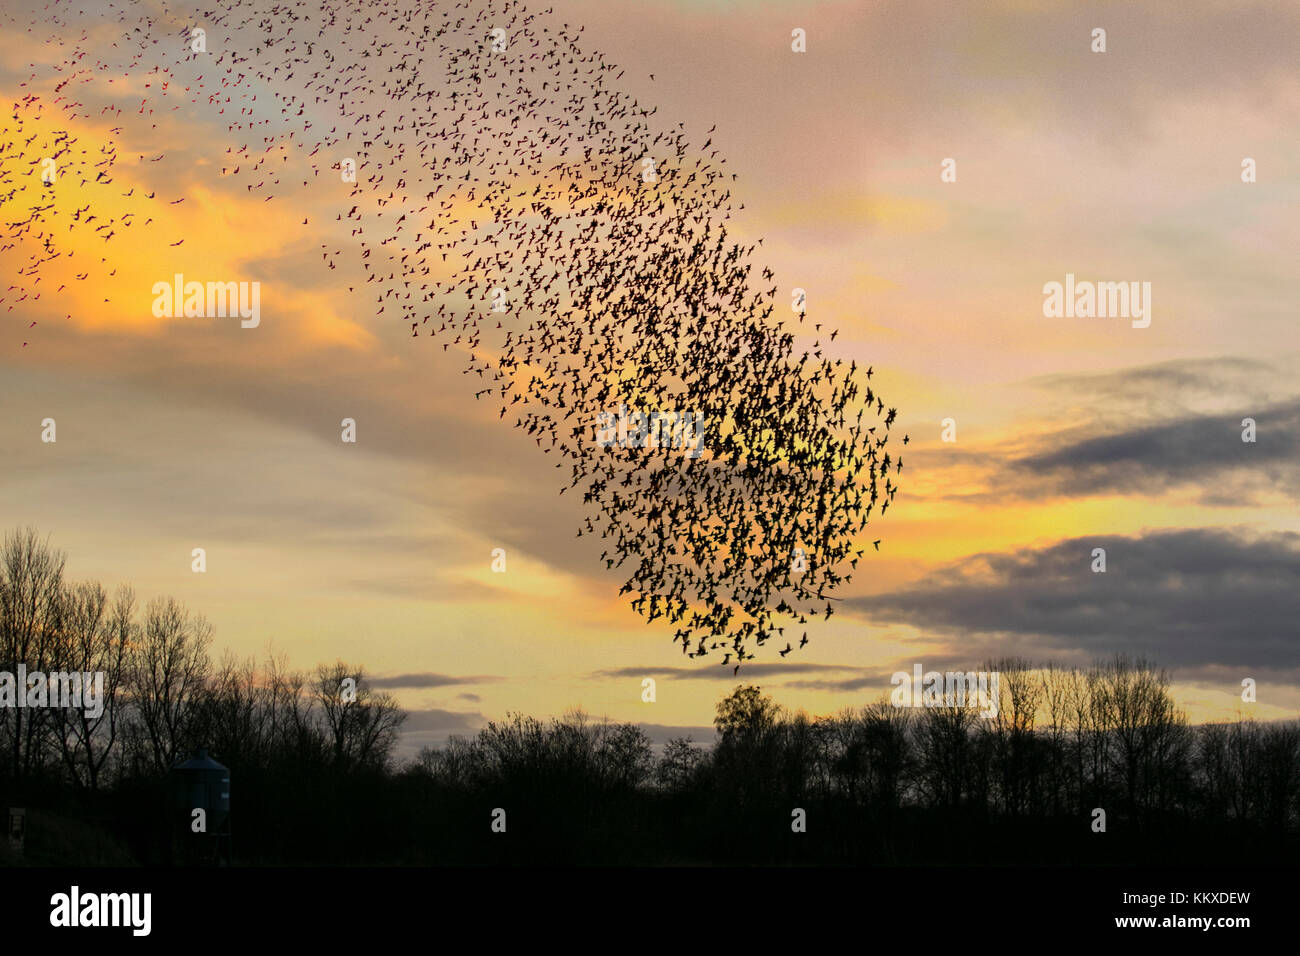 Burscough, Lancashire. UK Weather. 2nd December, 2017. Thousands of starling seeking a communal roost in the reed beds at Martin Mere, are harried and pursed by a resident peregrine falcon. The shapes and swirls form part of an evasive technique to survive and to confound and dazzle the bird of prey. The larger the simulated flocks, the harder it is for the predators to single out and catch an individual bird. Starlings can fly swiftly in coordinated and mesmerising formations as a group action to survive the attack. Credit: MediaWorldImages/Alamy Live News Stock Photo